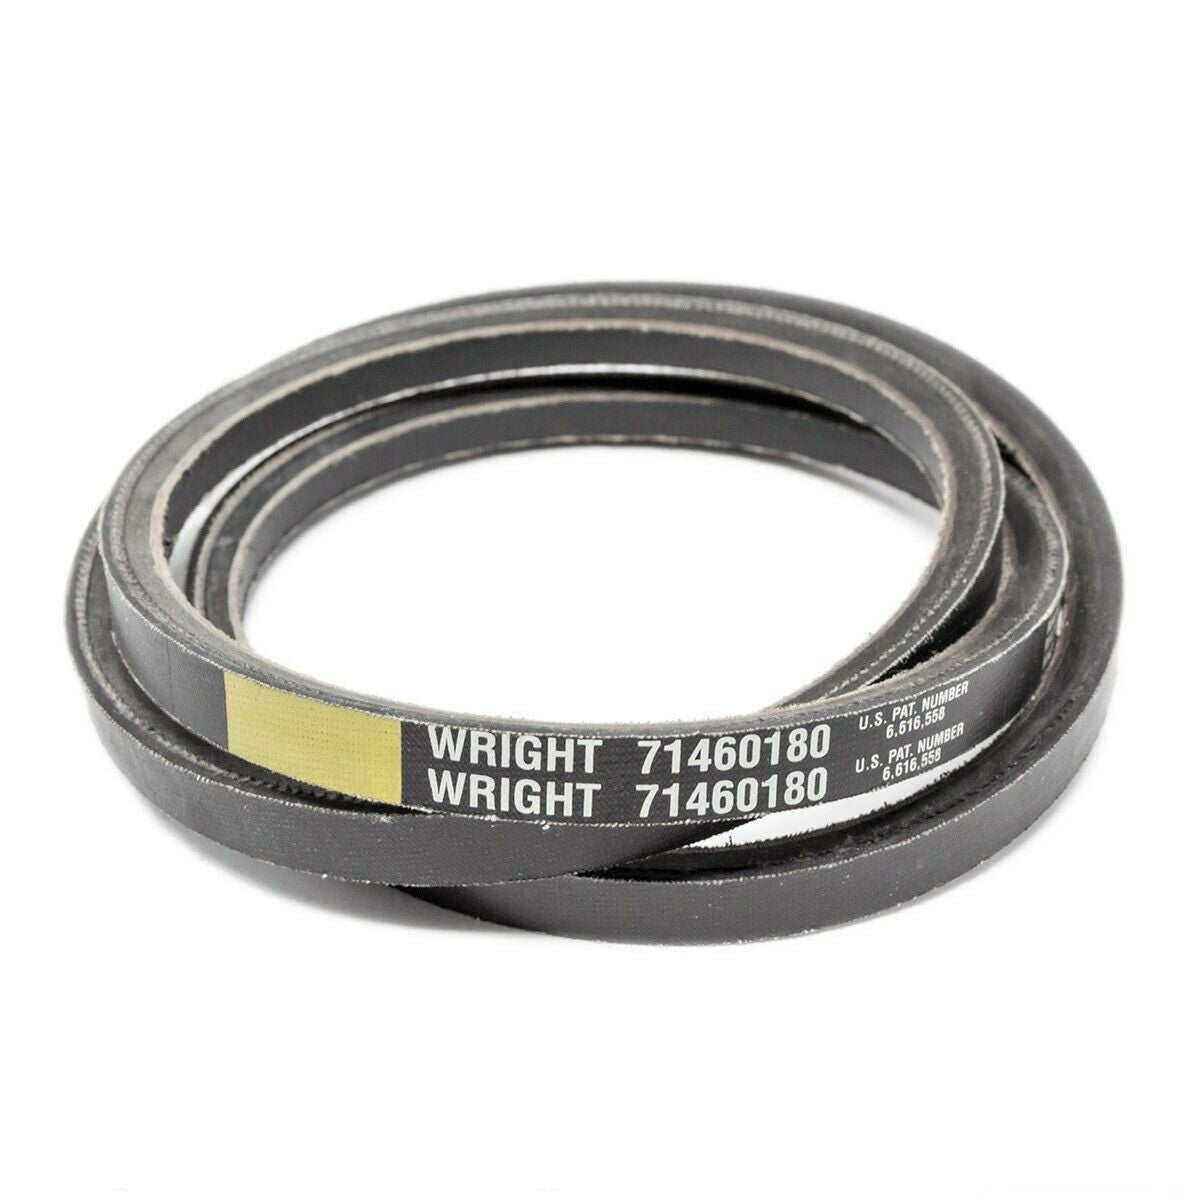 Wright 71460180 A-EDPM Wrapped Belt